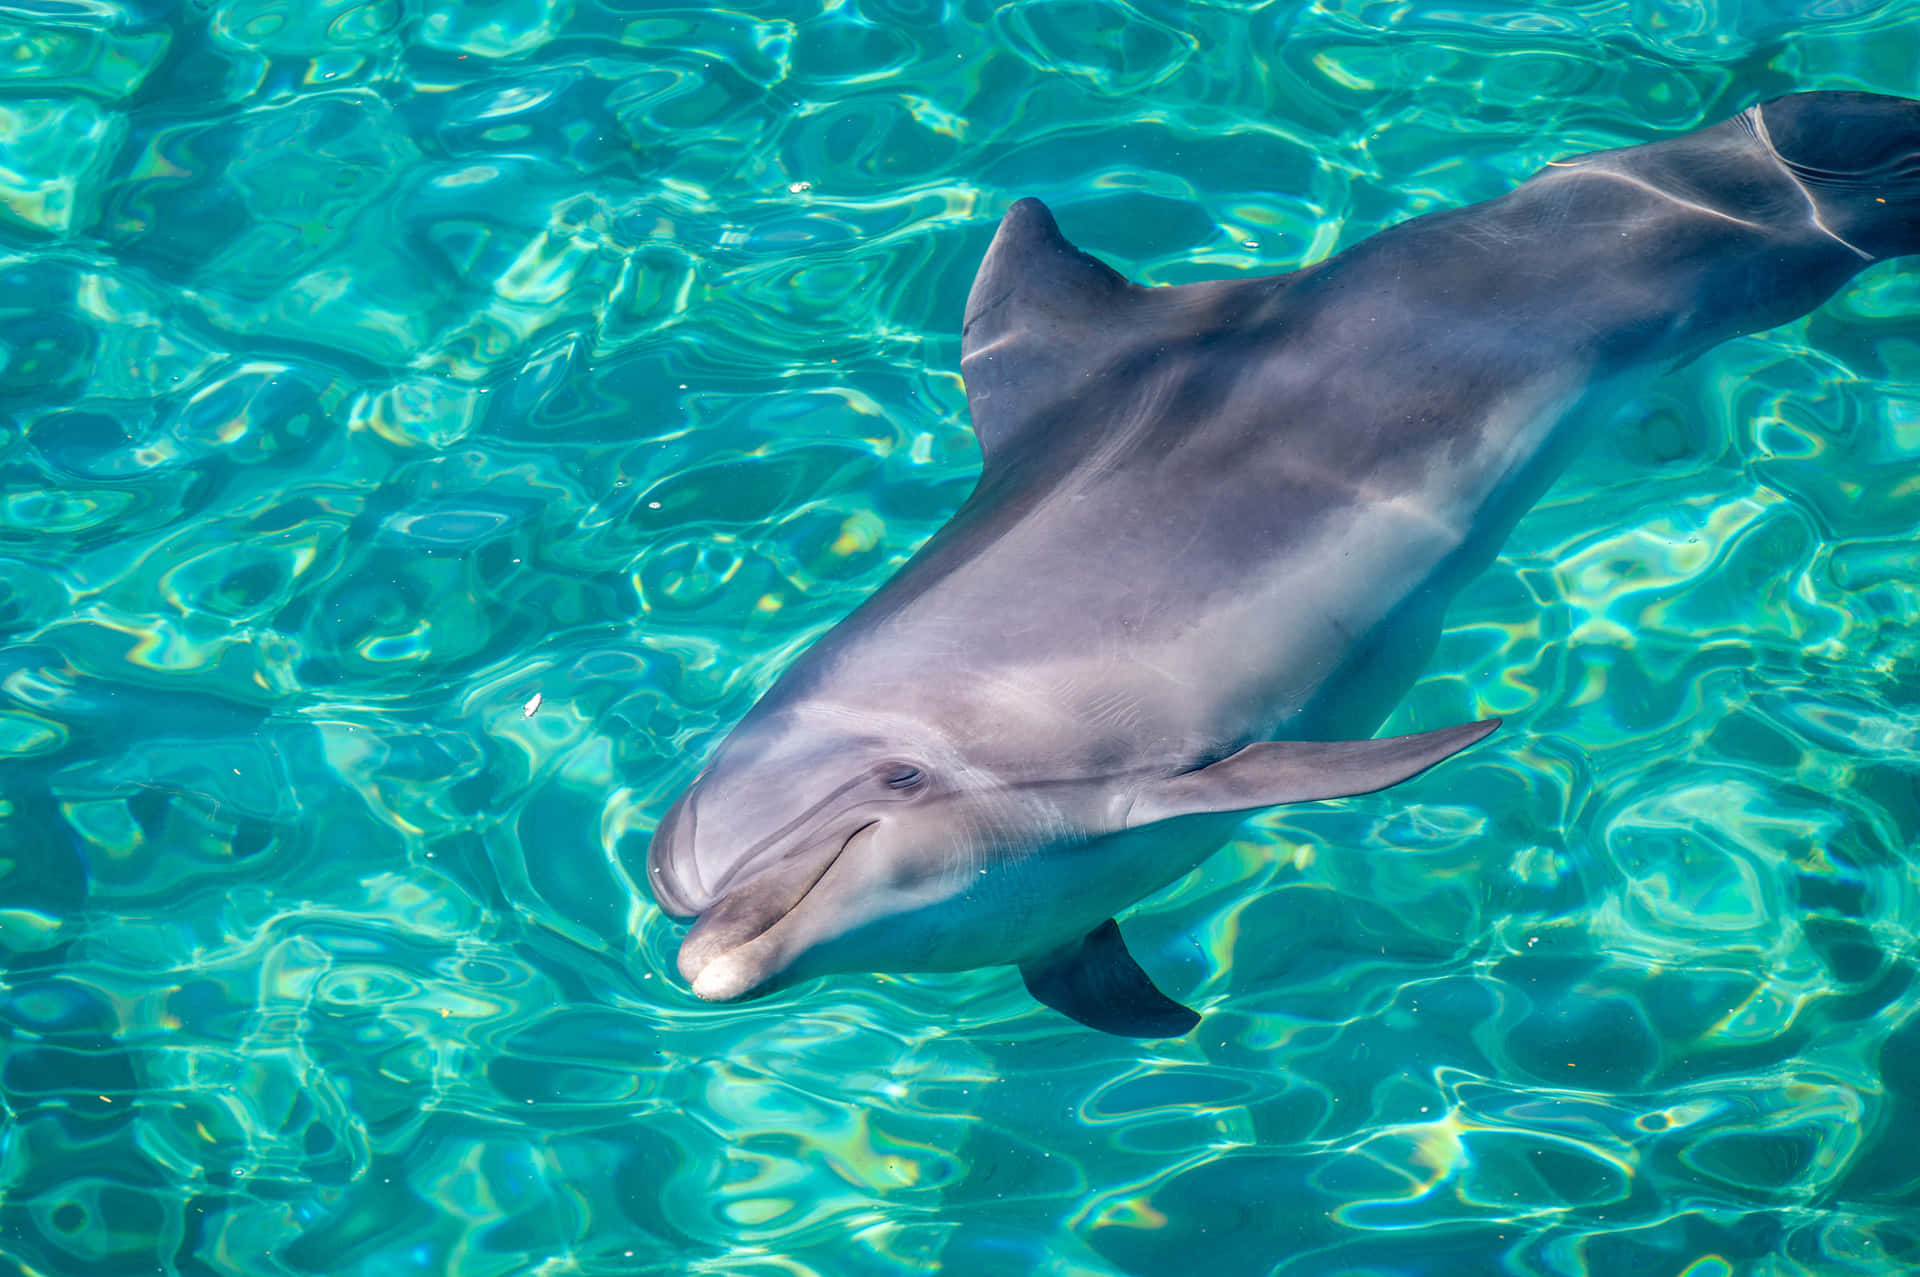 A playful dolphin jumping out of the turquoise water